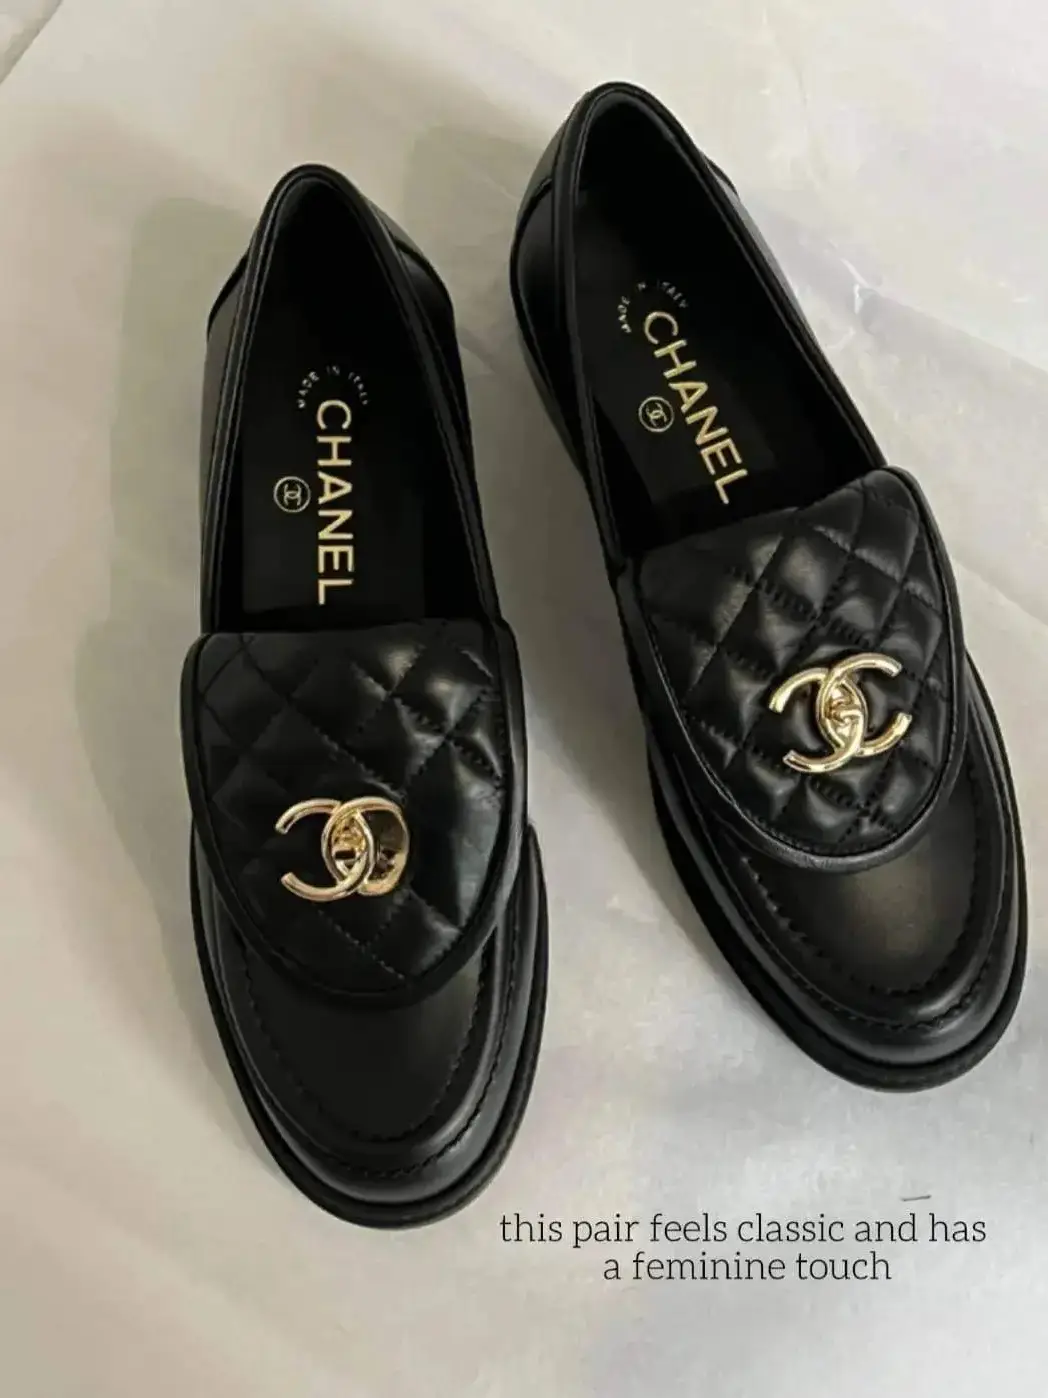 CHANEL QUILTED LOAFERS, Gallery posted by Maia Miller